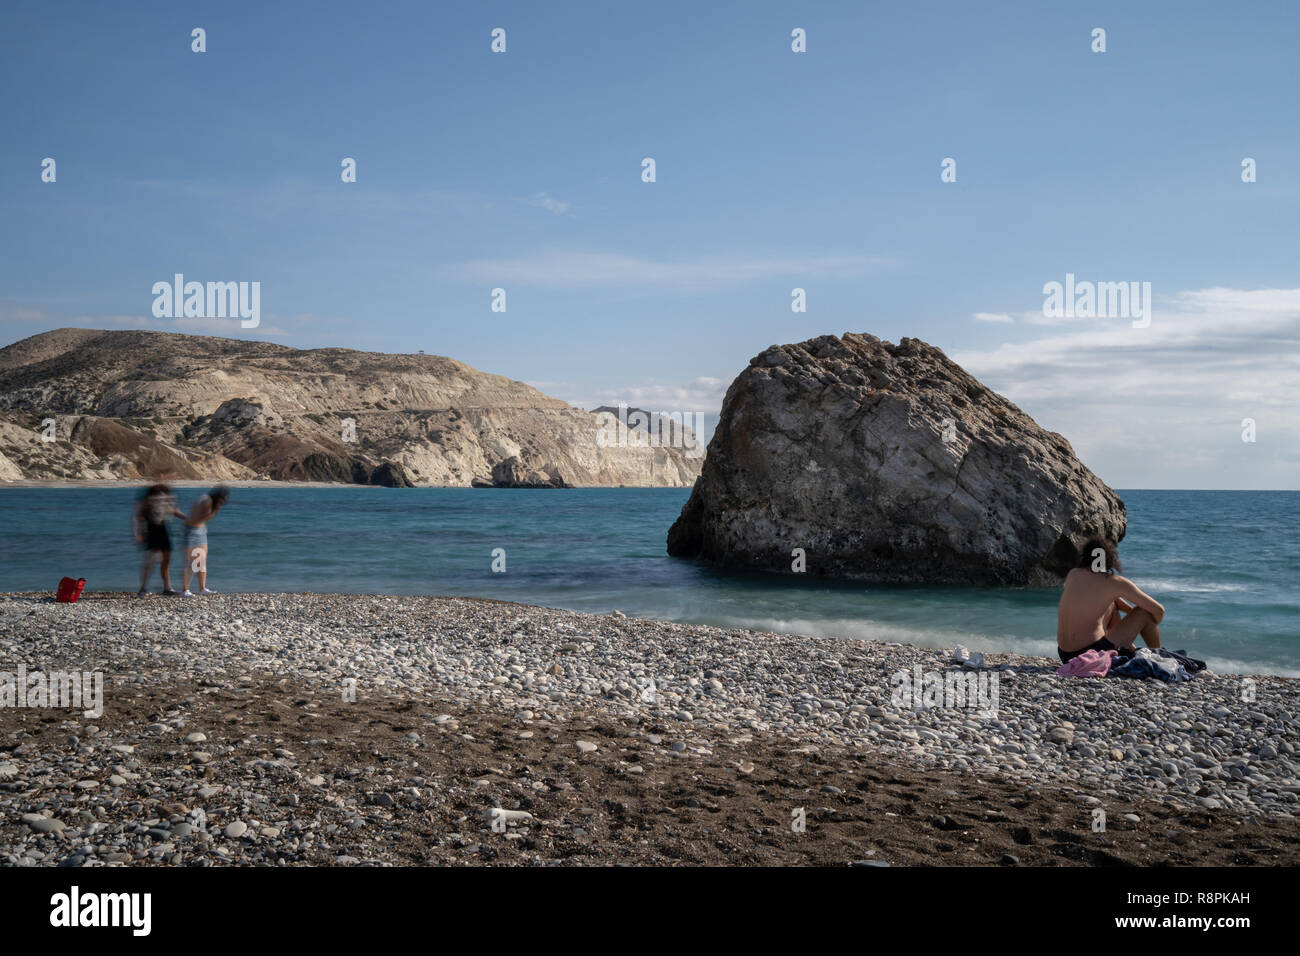 Landscapephoto of Aphrodite's Rock with view to the sea Stock Photo